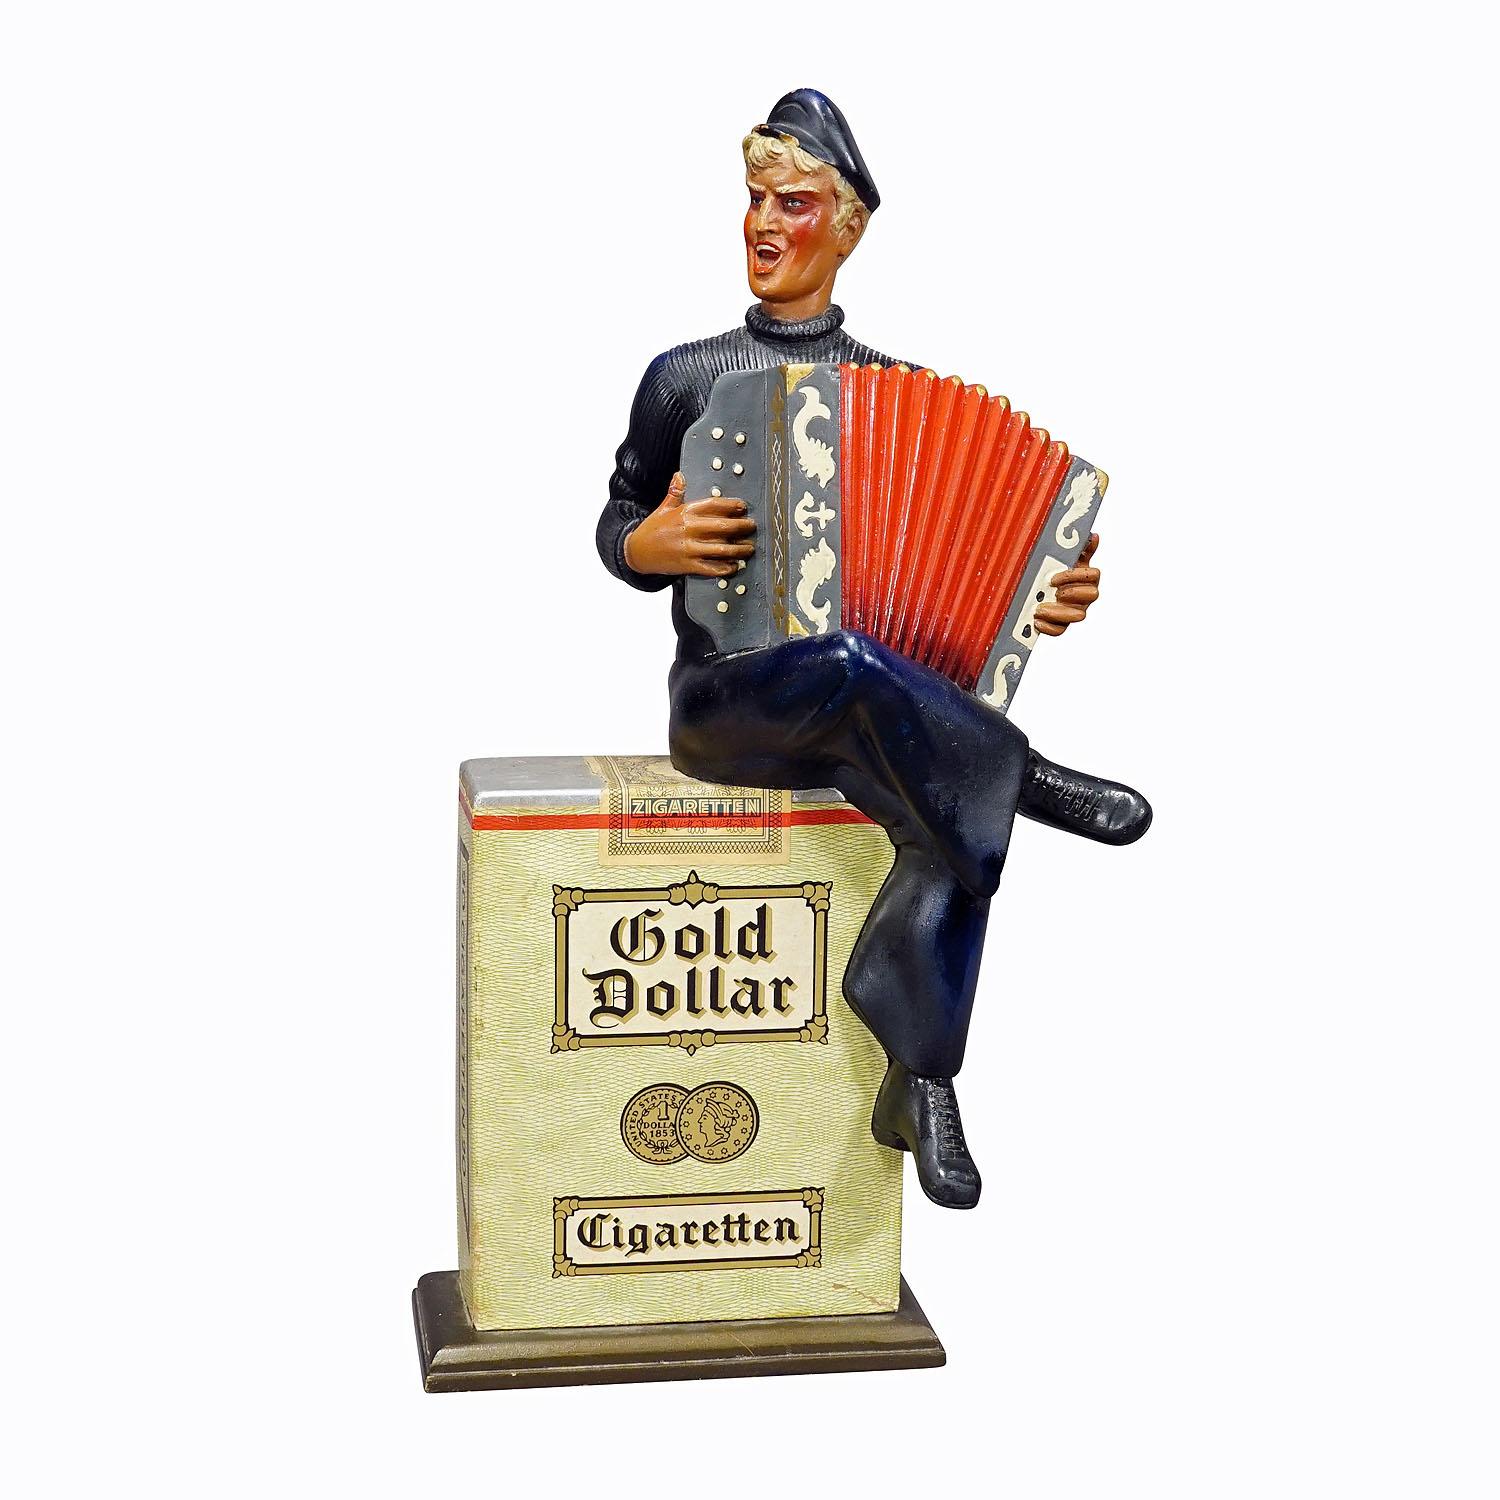 Vintage Gold Dollar Cigarettes Advertising Sculpture 1950s

This old BAT (British American Tobacco) advertising figure made of wood and plaster advertising the cigarette brand 